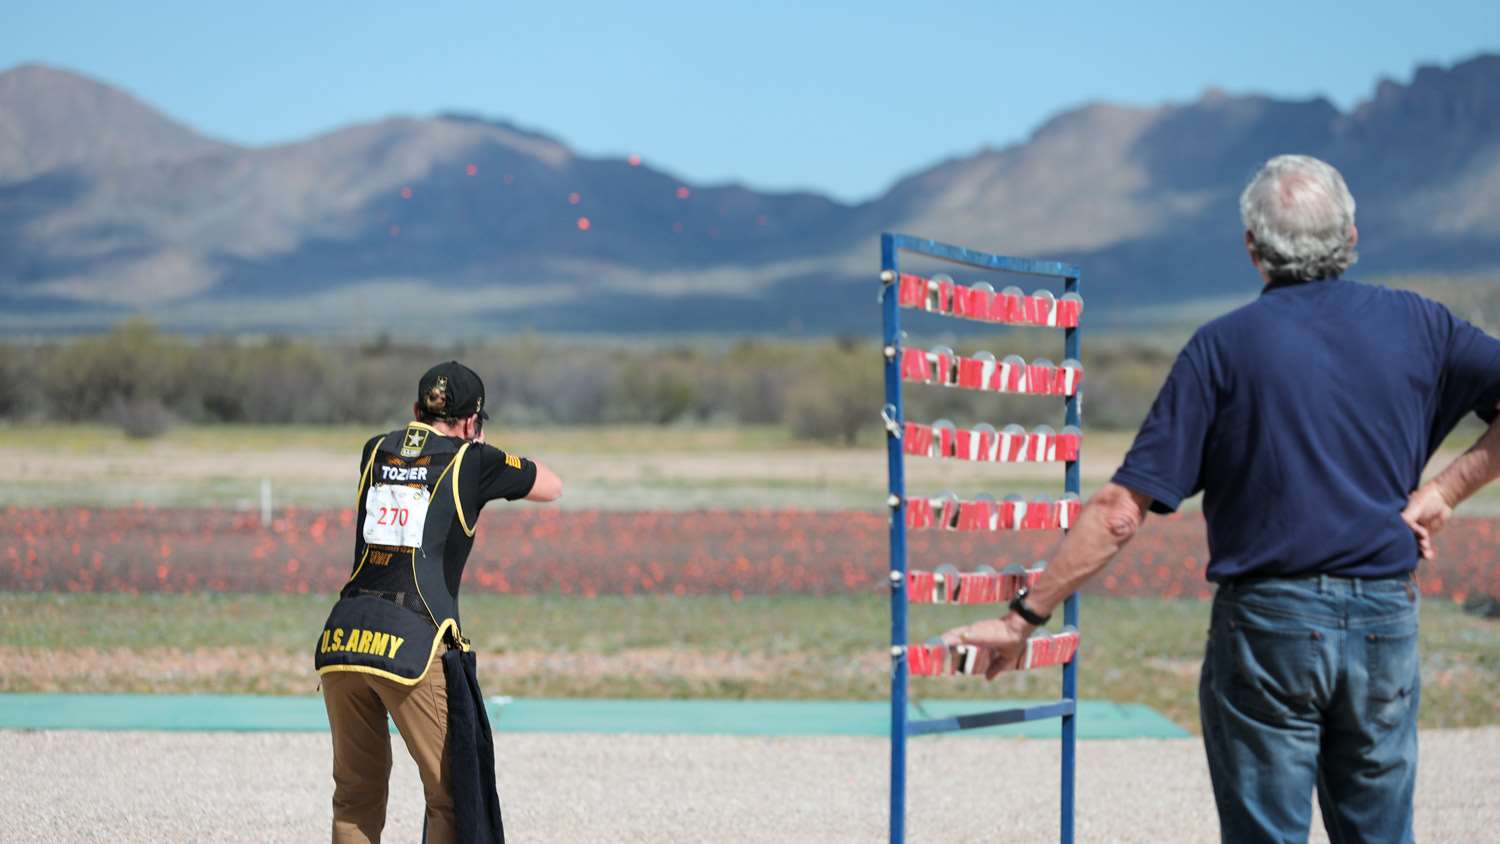 Rachel Tozier, 2020 Olympic Trap Trials